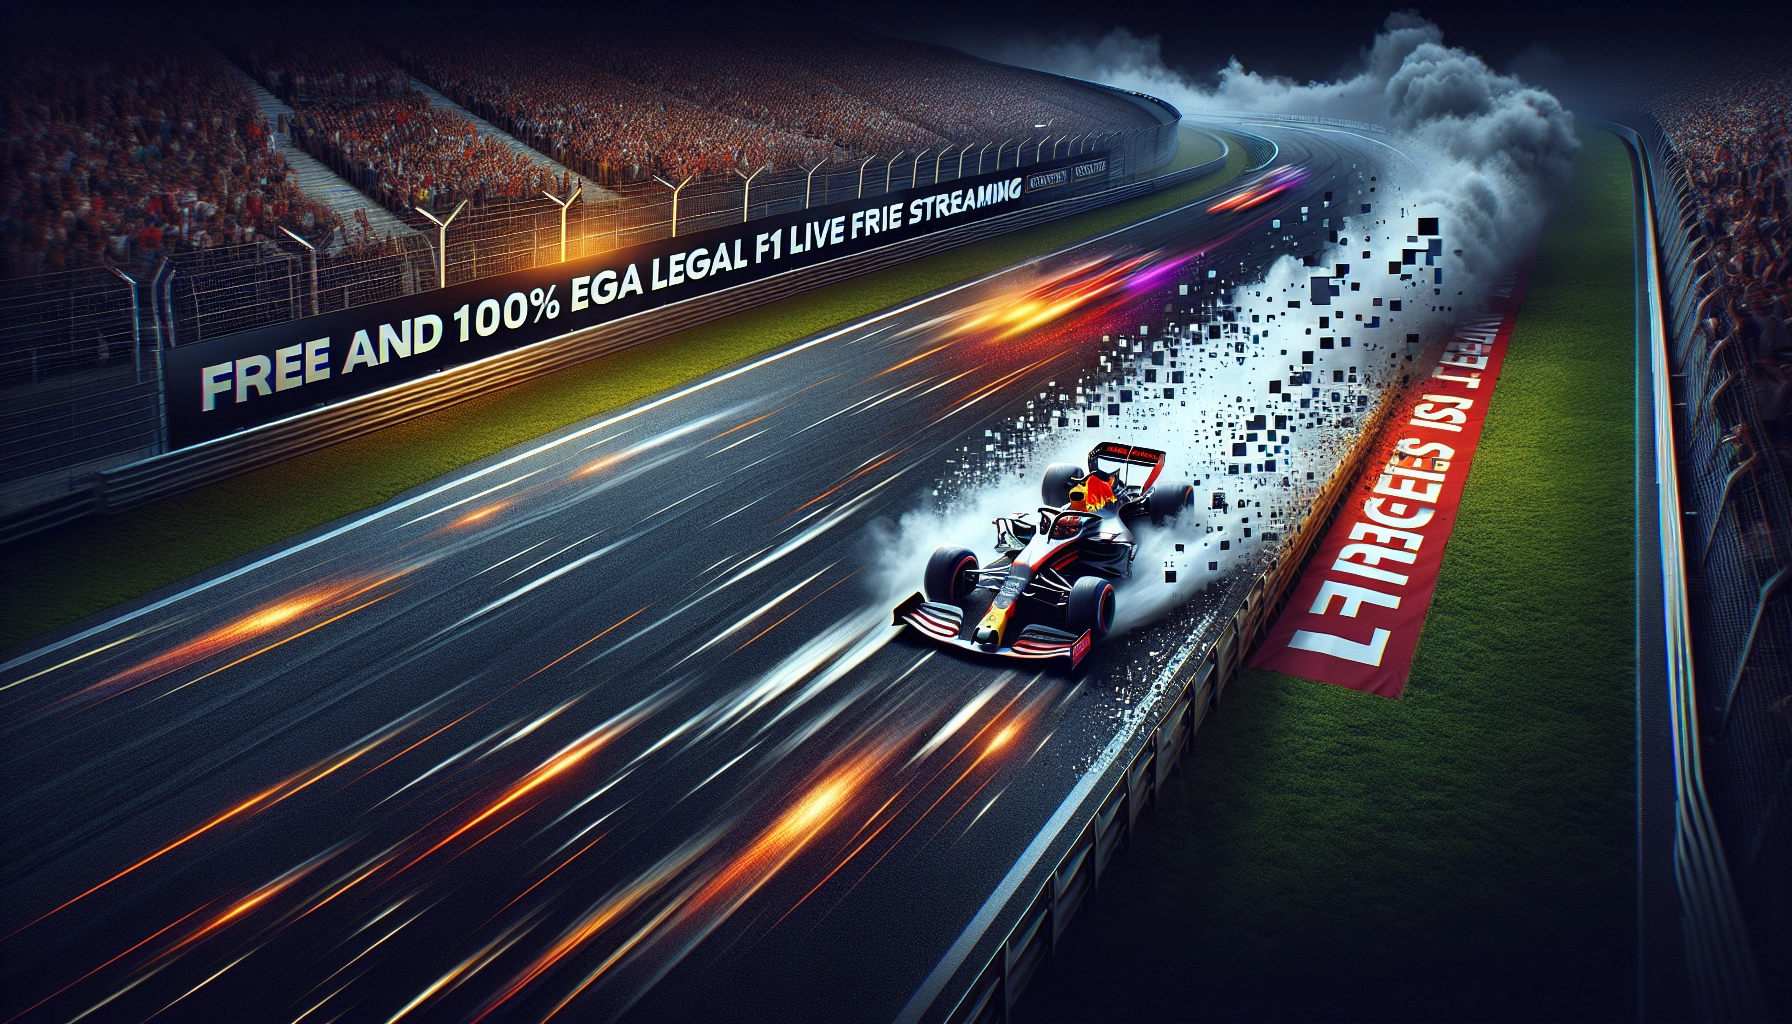 F1 live streaming featured image